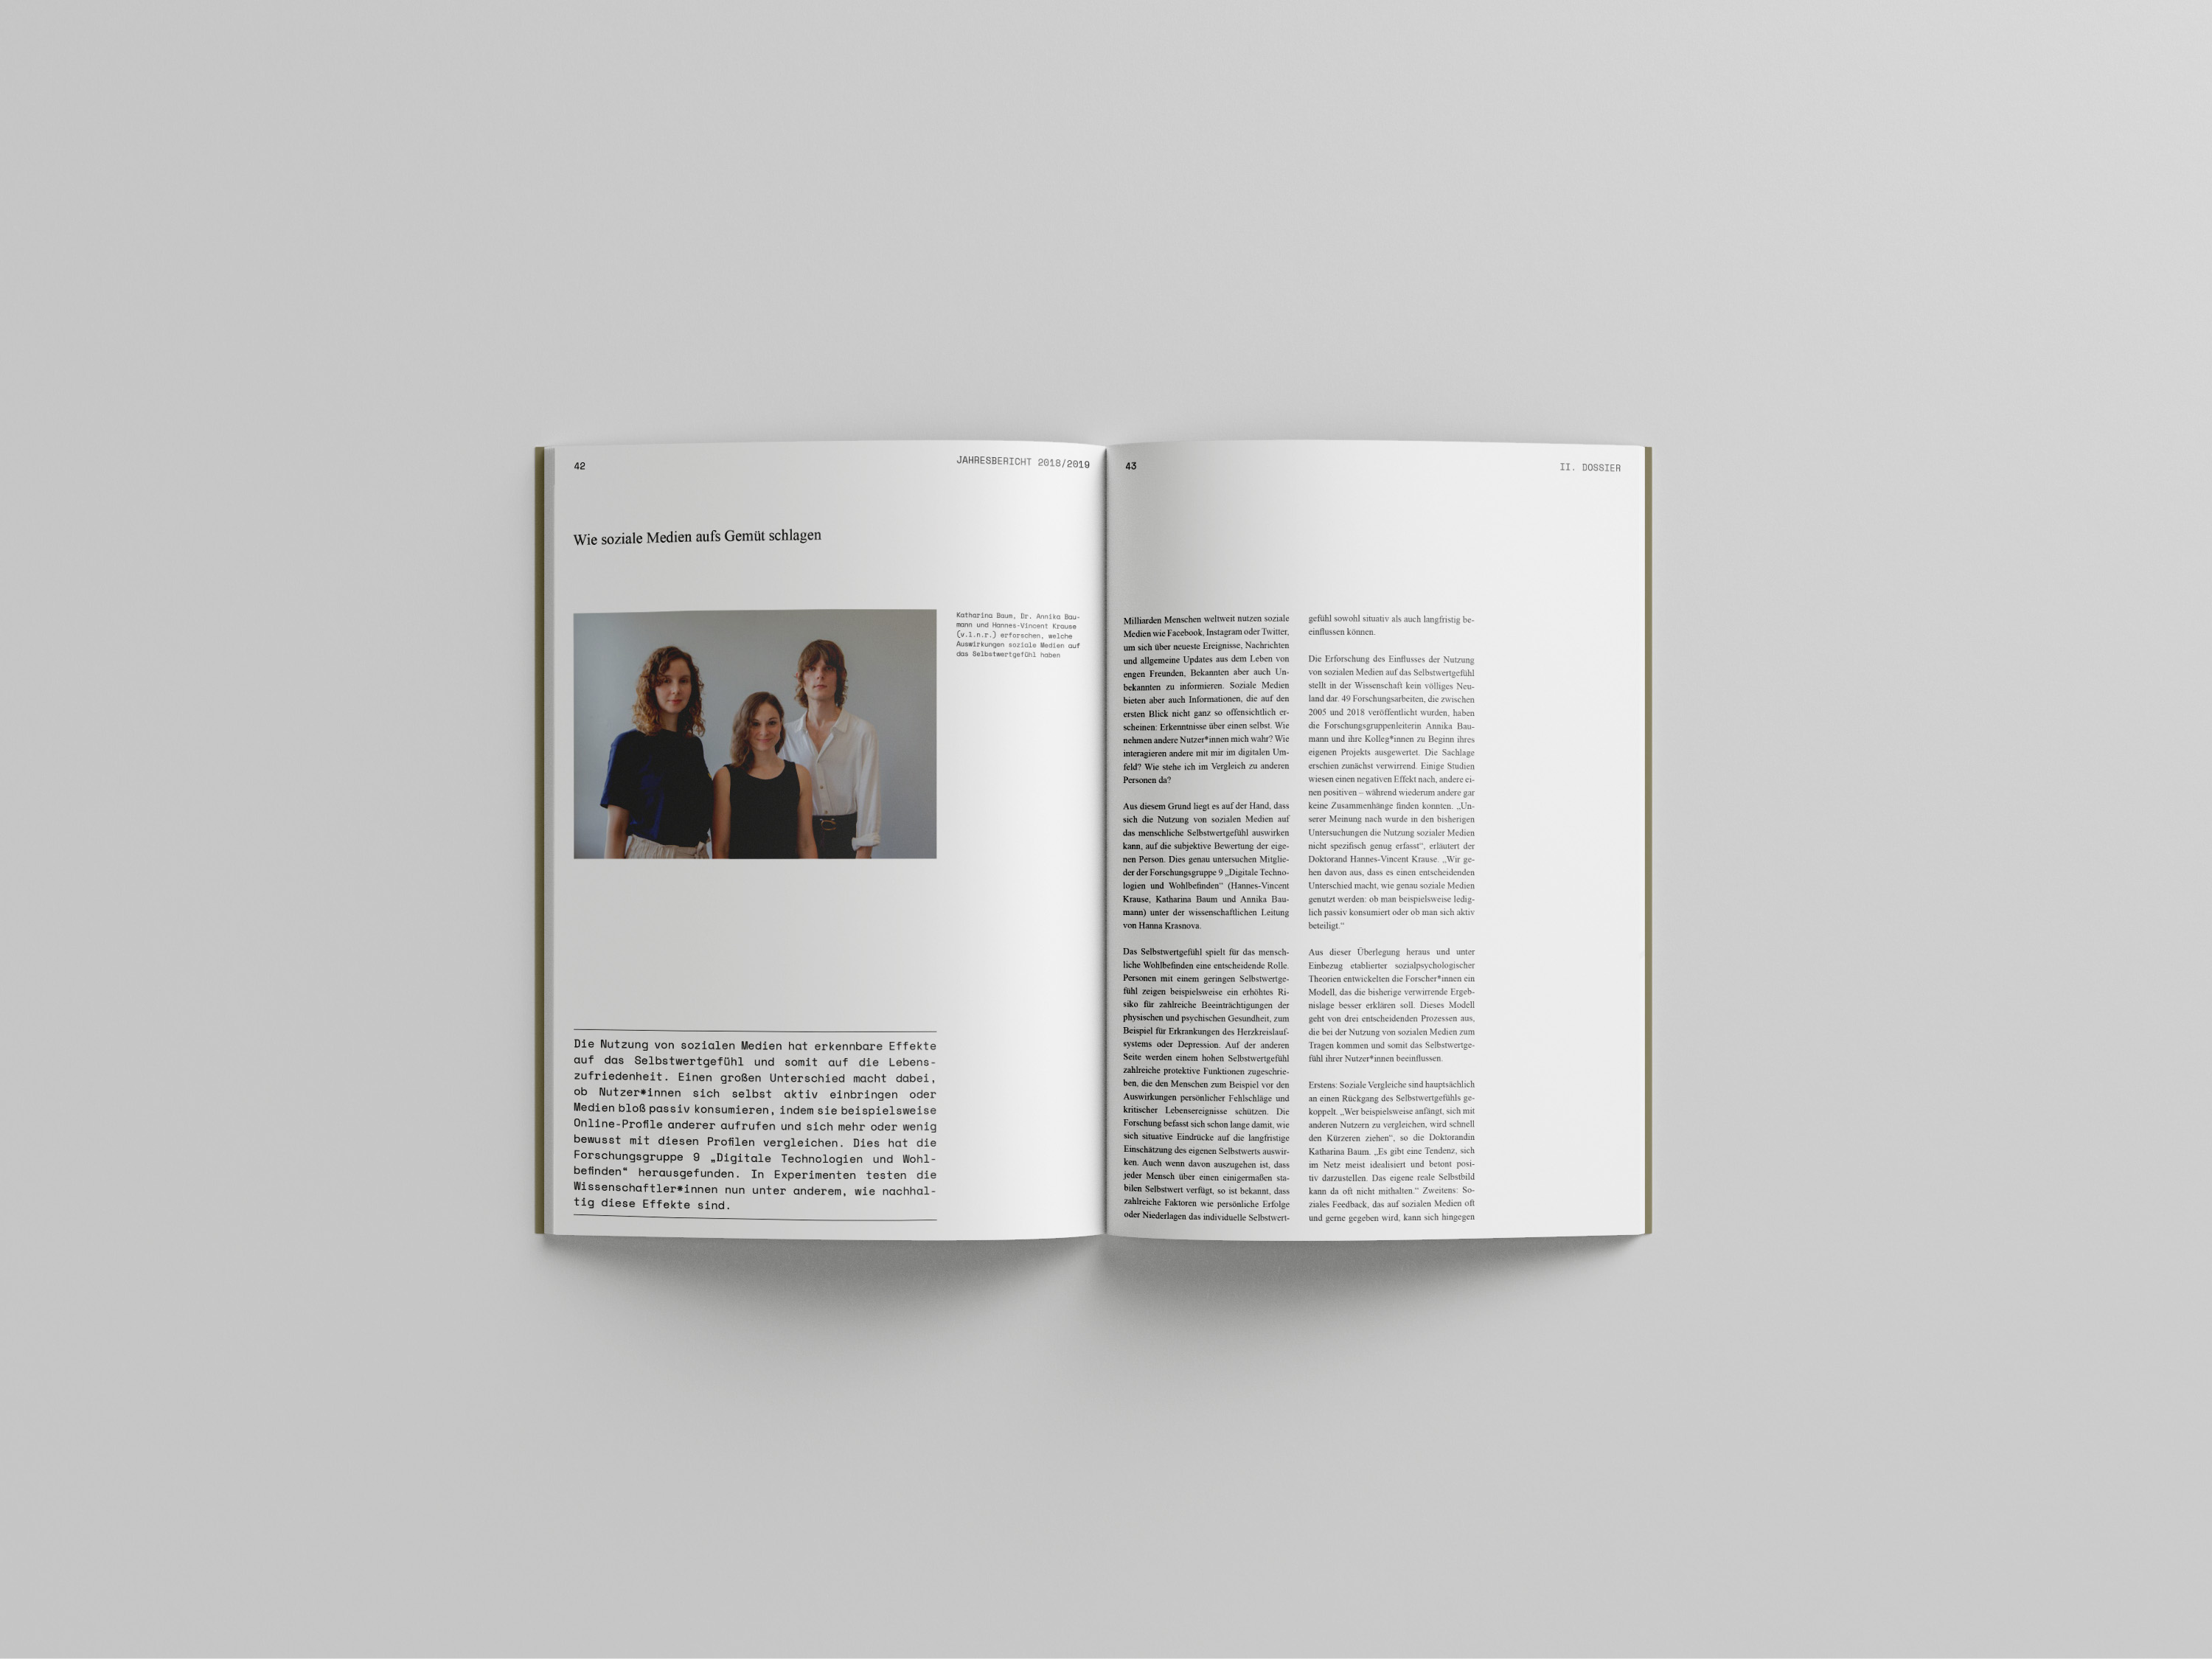 An image of the opened spread of the Annual Report for the Weizenbaum Institute, displaying an image of 3 people and a block of text on the left page and 2 text columns on the right page.